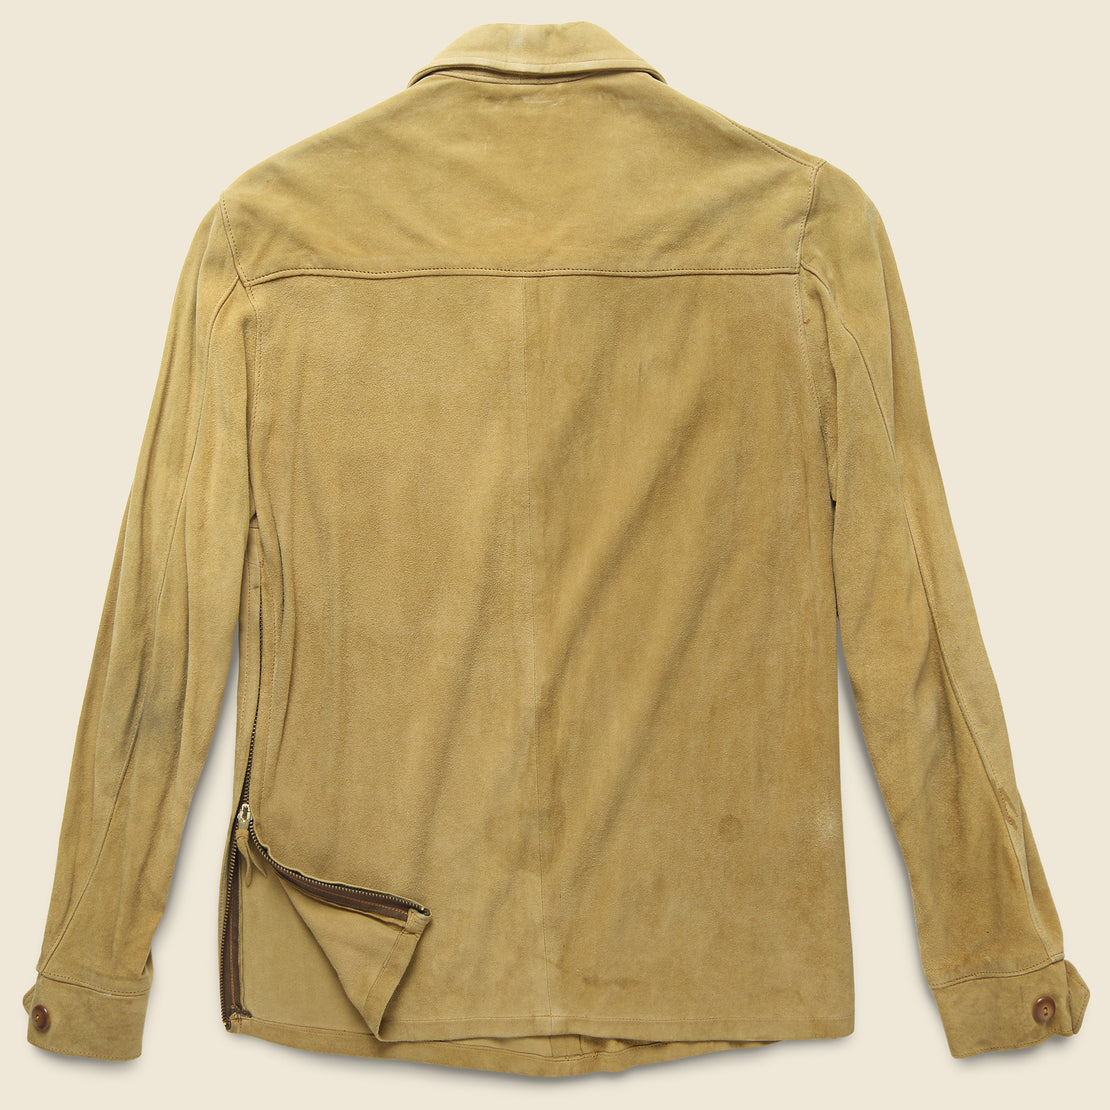 1950s Deerskin Lace-Up Overshirt - Tan Suede - Vintage - STAG Provisions - W - Tops - L/S Woven - Overshirt